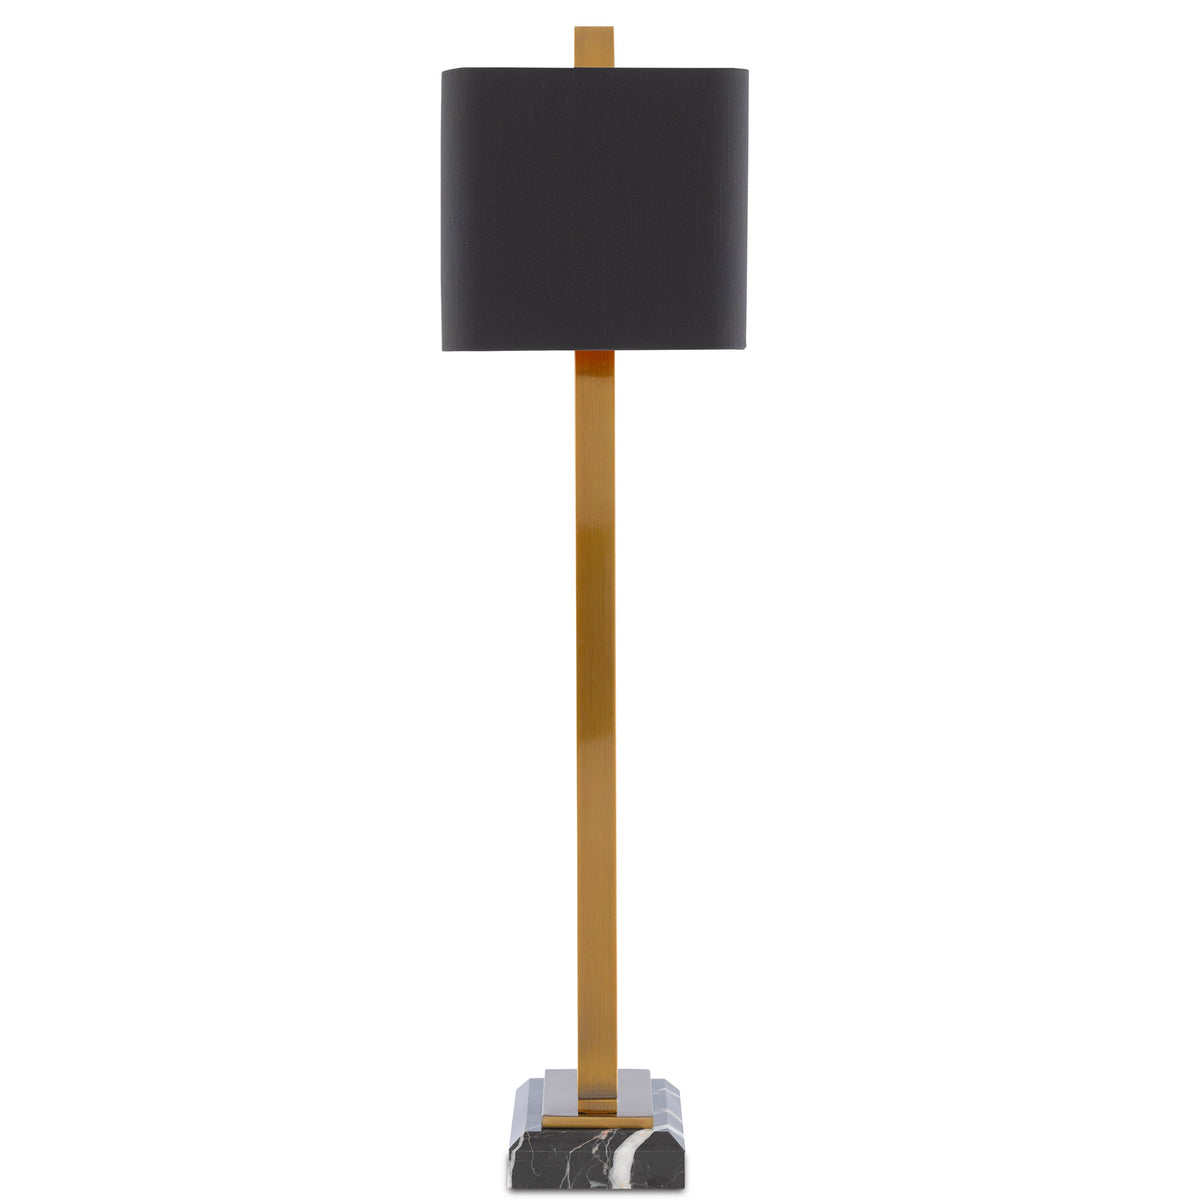 Adorn Large Table Lamp